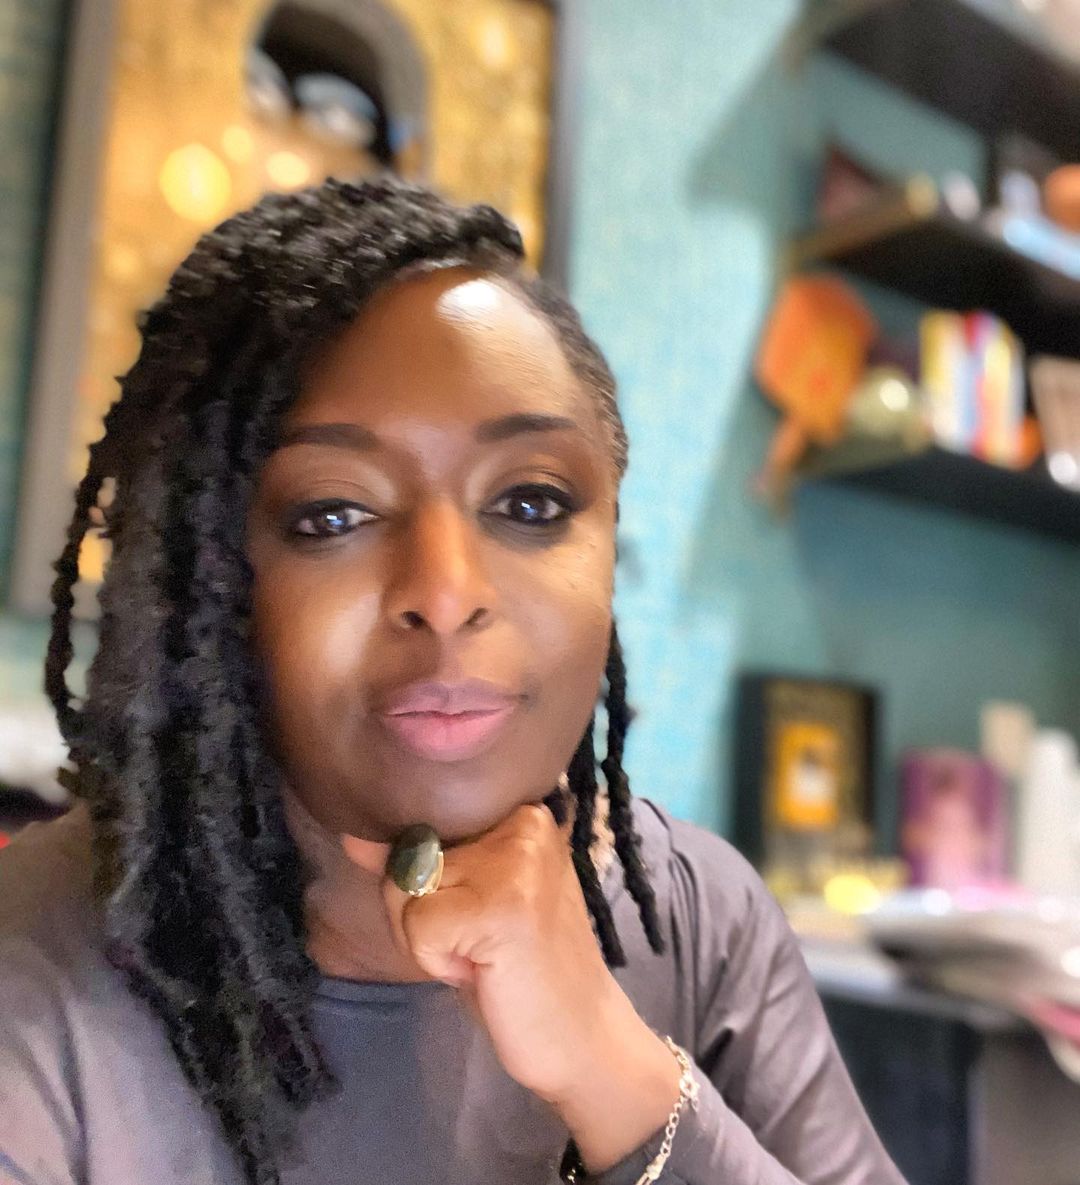 Kimberly Bryant of Black Girls Code placed on leave due to alleged misconduct complaints